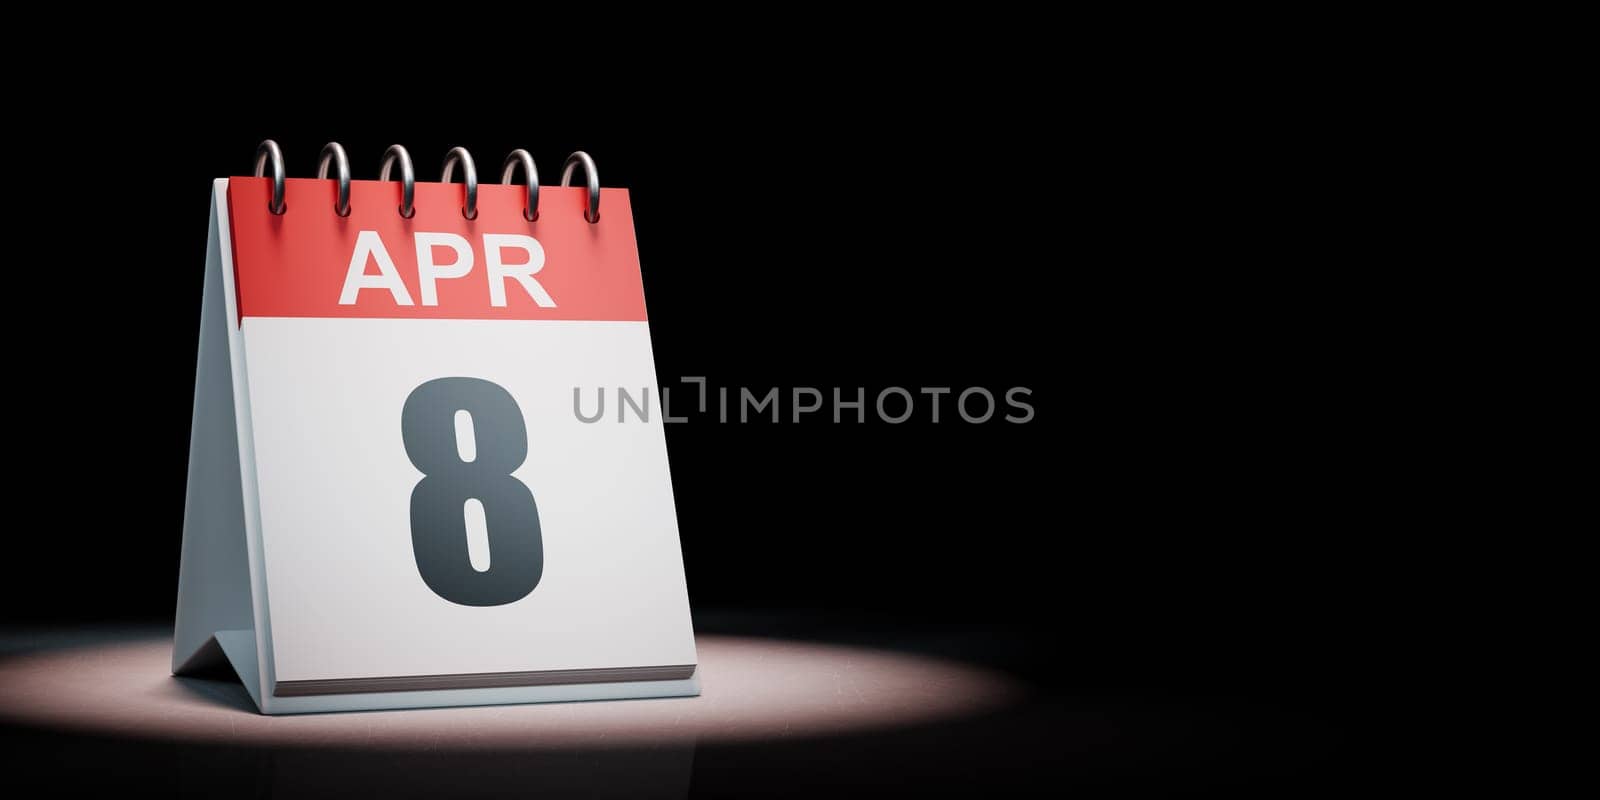 Red and White April 8 Desk Calendar Spotlighted on Black Background with Copy Space 3D Illustration